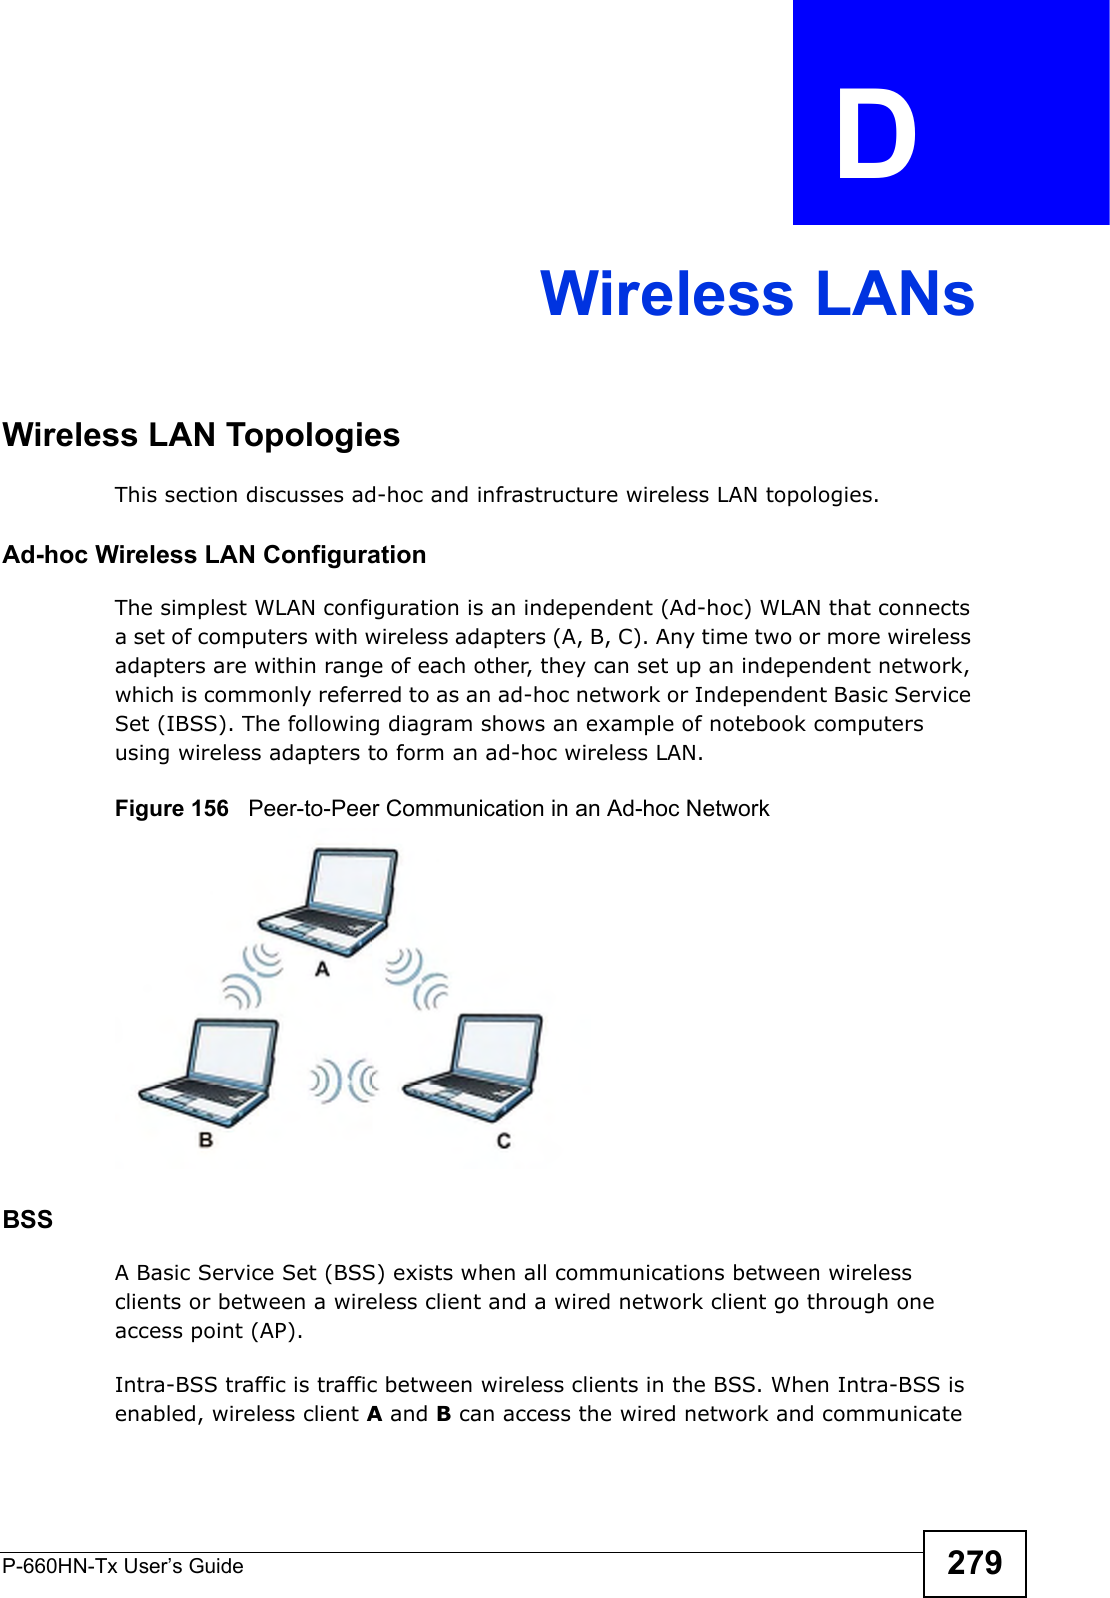 P-660HN-Tx User’s Guide 279APPENDIX  D Wireless LANsWireless LAN TopologiesThis section discusses ad-hoc and infrastructure wireless LAN topologies.Ad-hoc Wireless LAN ConfigurationThe simplest WLAN configuration is an independent (Ad-hoc) WLAN that connects a set of computers with wireless adapters (A, B, C). Any time two or more wireless adapters are within range of each other, they can set up an independent network, which is commonly referred to as an ad-hoc network or Independent Basic Service Set (IBSS). The following diagram shows an example of notebook computers using wireless adapters to form an ad-hoc wireless LAN. Figure 156   Peer-to-Peer Communication in an Ad-hoc NetworkBSSA Basic Service Set (BSS) exists when all communications between wireless clients or between a wireless client and a wired network client go through one access point (AP). Intra-BSS traffic is traffic between wireless clients in the BSS. When Intra-BSS is enabled, wireless client A and B can access the wired network and communicate 